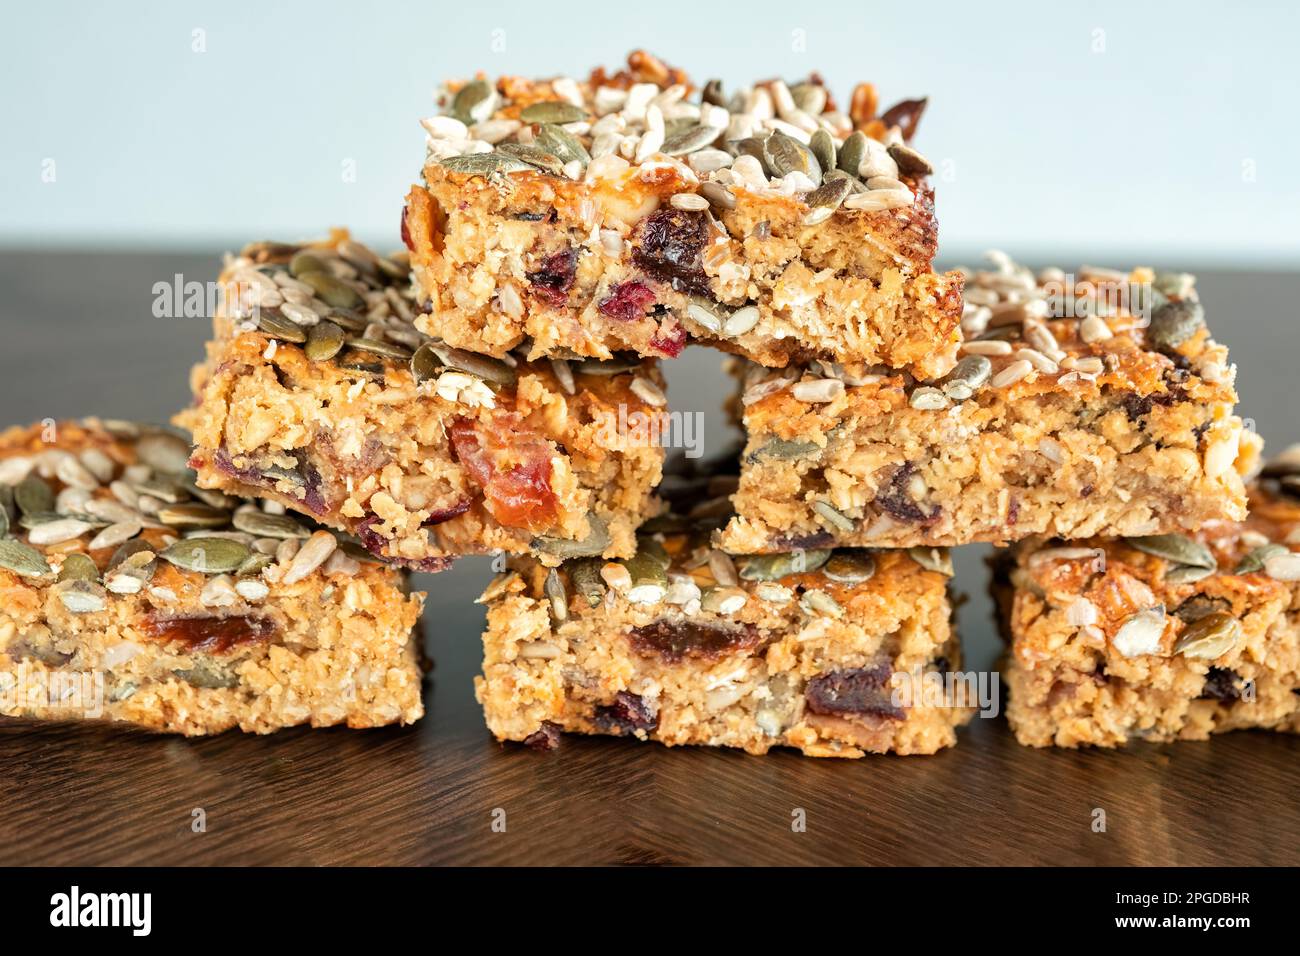 A stack of home made fruit flapjack. The flapjack has been baked with assorted fruit and nuts including dates, sultanas and walnuts Stock Photo